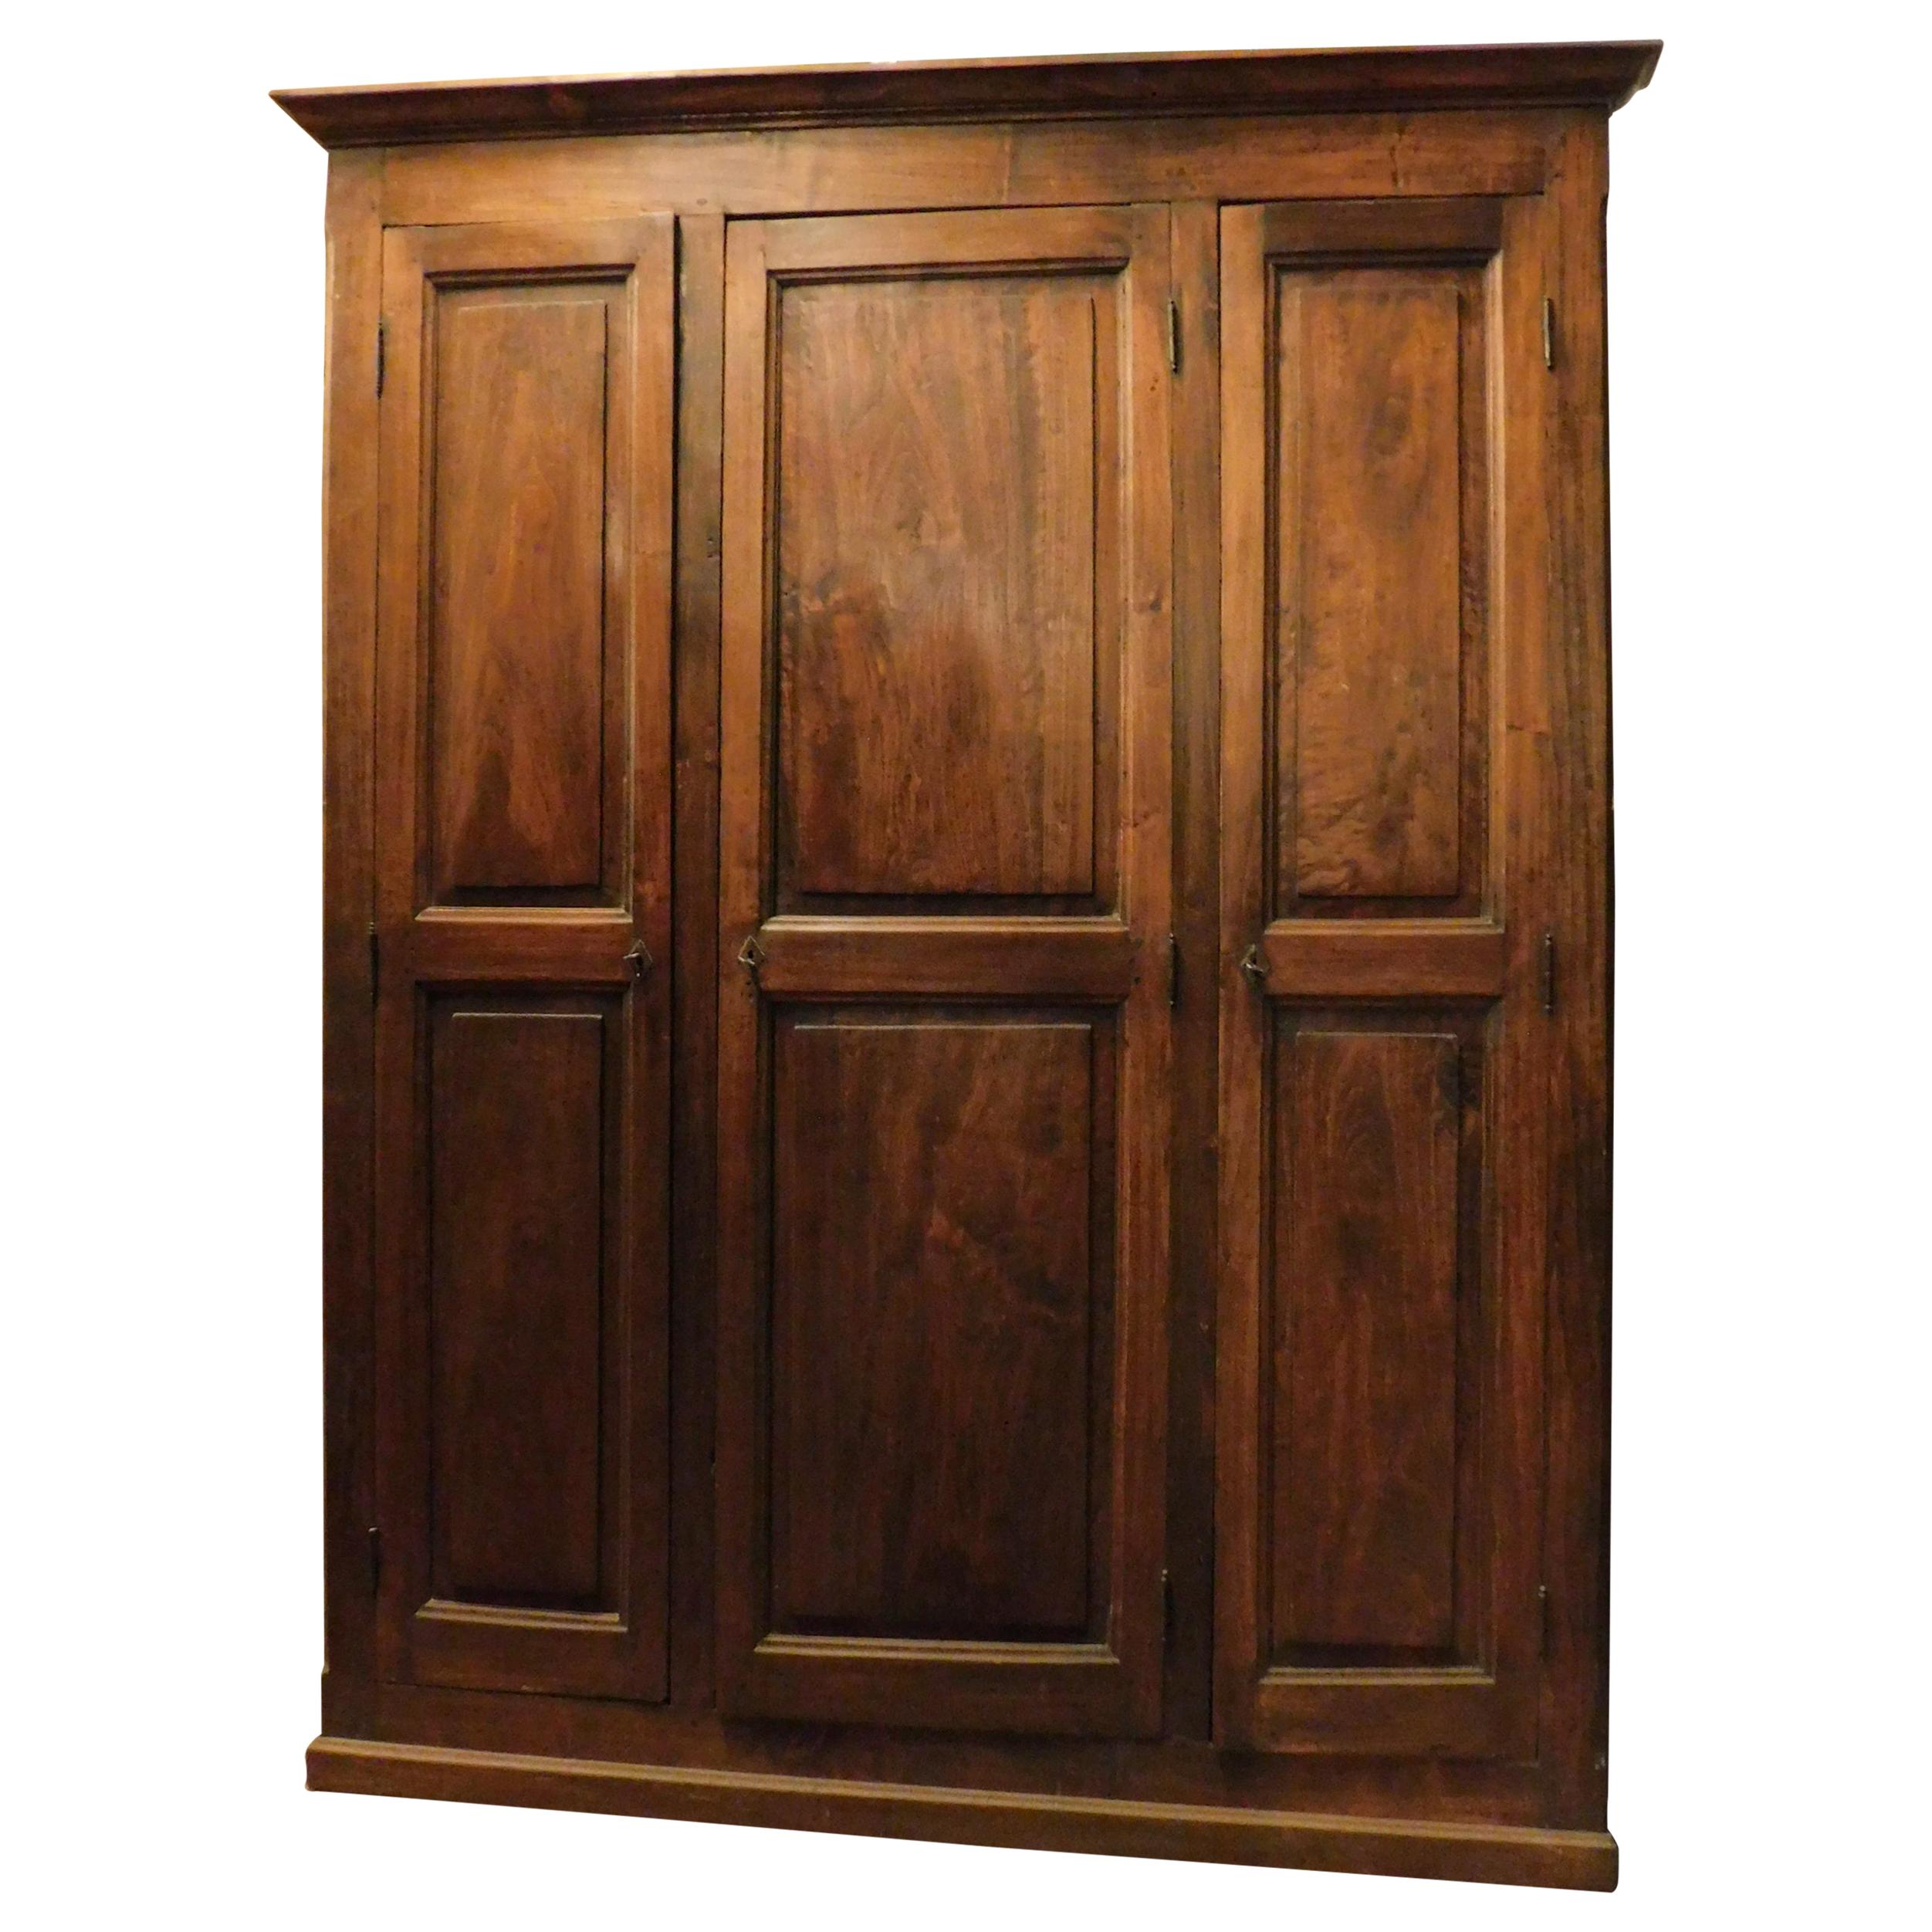 Antique Placard, Brown Poplar Wardrobe with Three Doors, 19th Century Italy For Sale